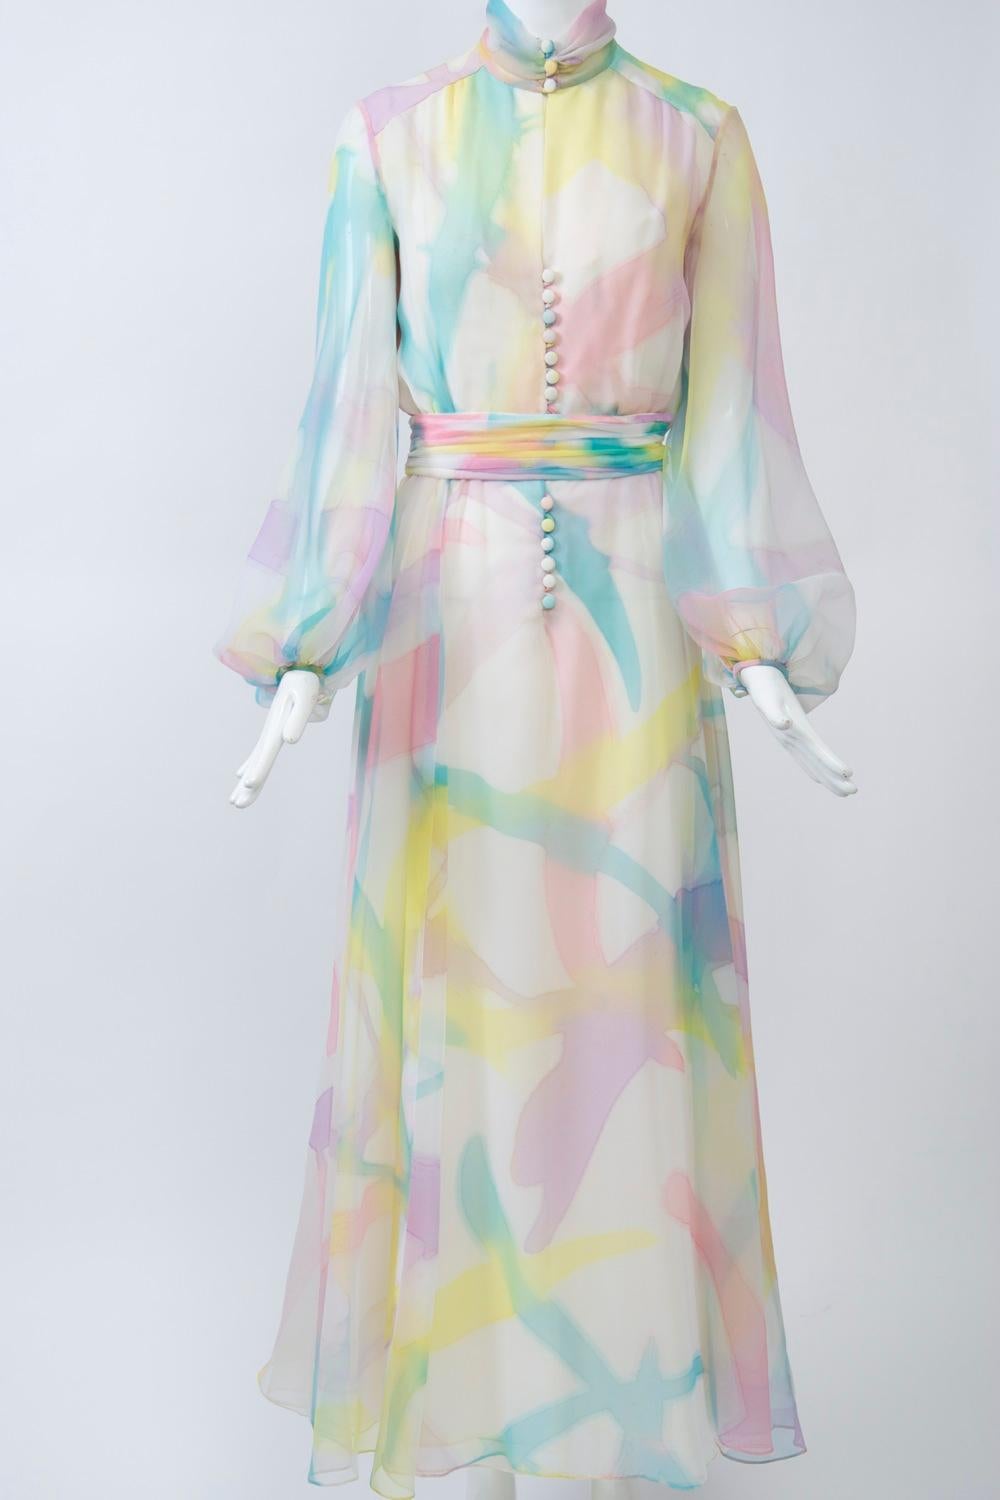 Sheer gauzy gown in an abstract, pastel, watercolor design featuring self buttons and loops down the front with a keyhole bodice and balloon sleeves fastened at the wrist with a matching button. The high, shirred and buttoned neck is mirrored in the